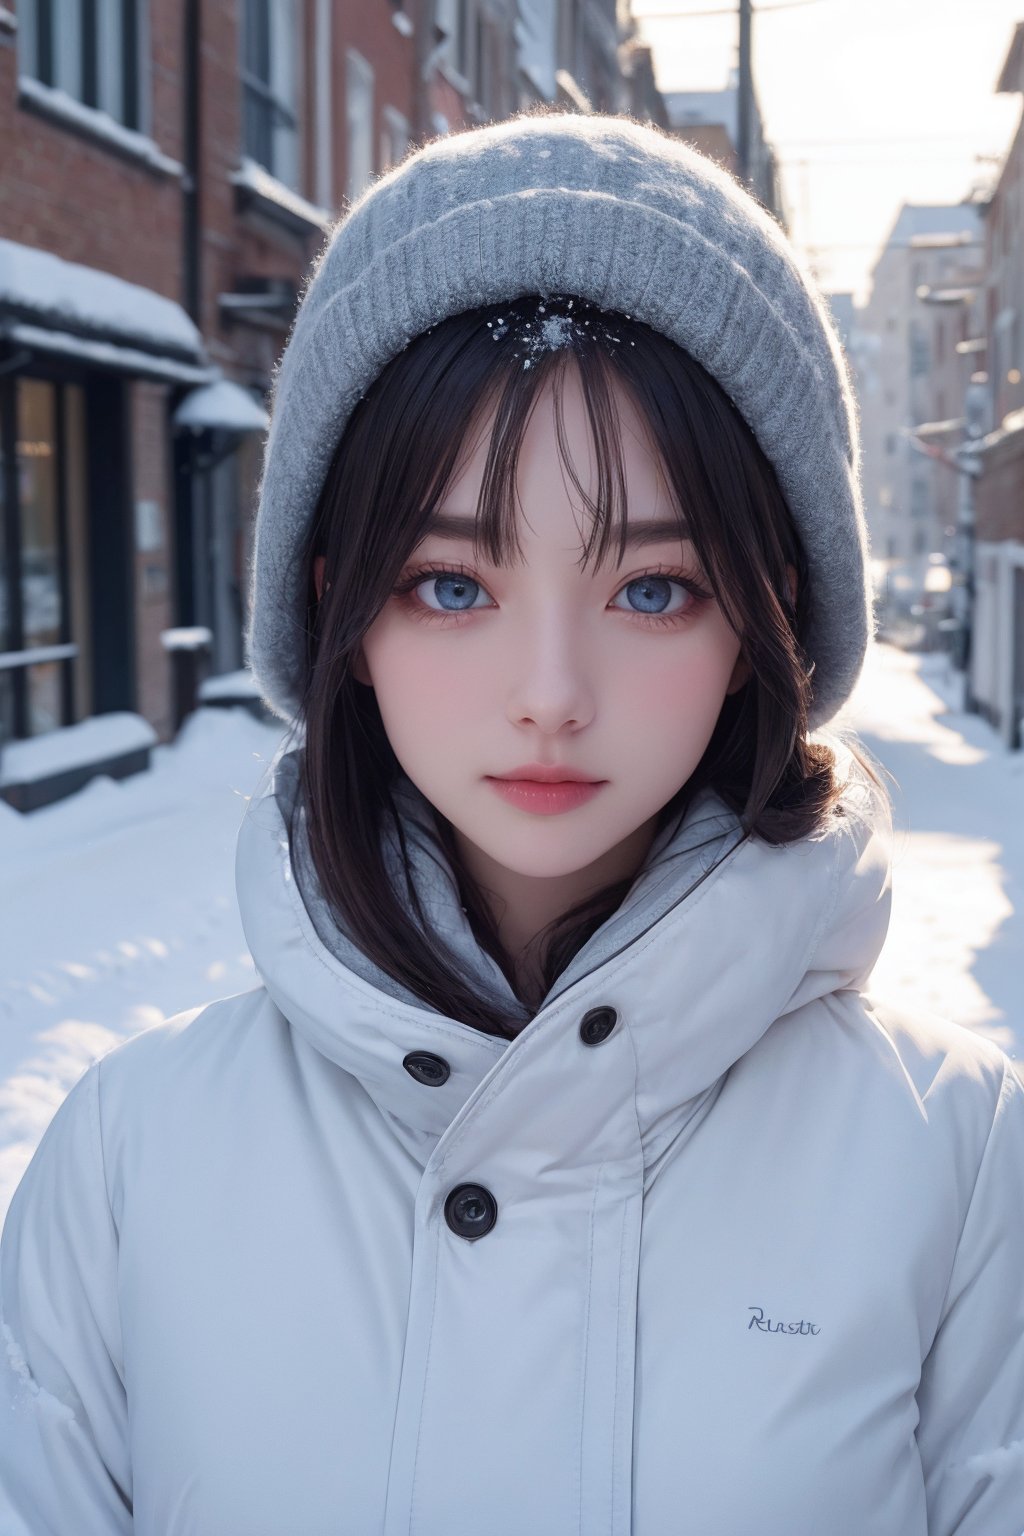 8k, ultra highres, real light and shadow, beautiful eyes, beautiful women, in the snow scene in winter, upper body, street